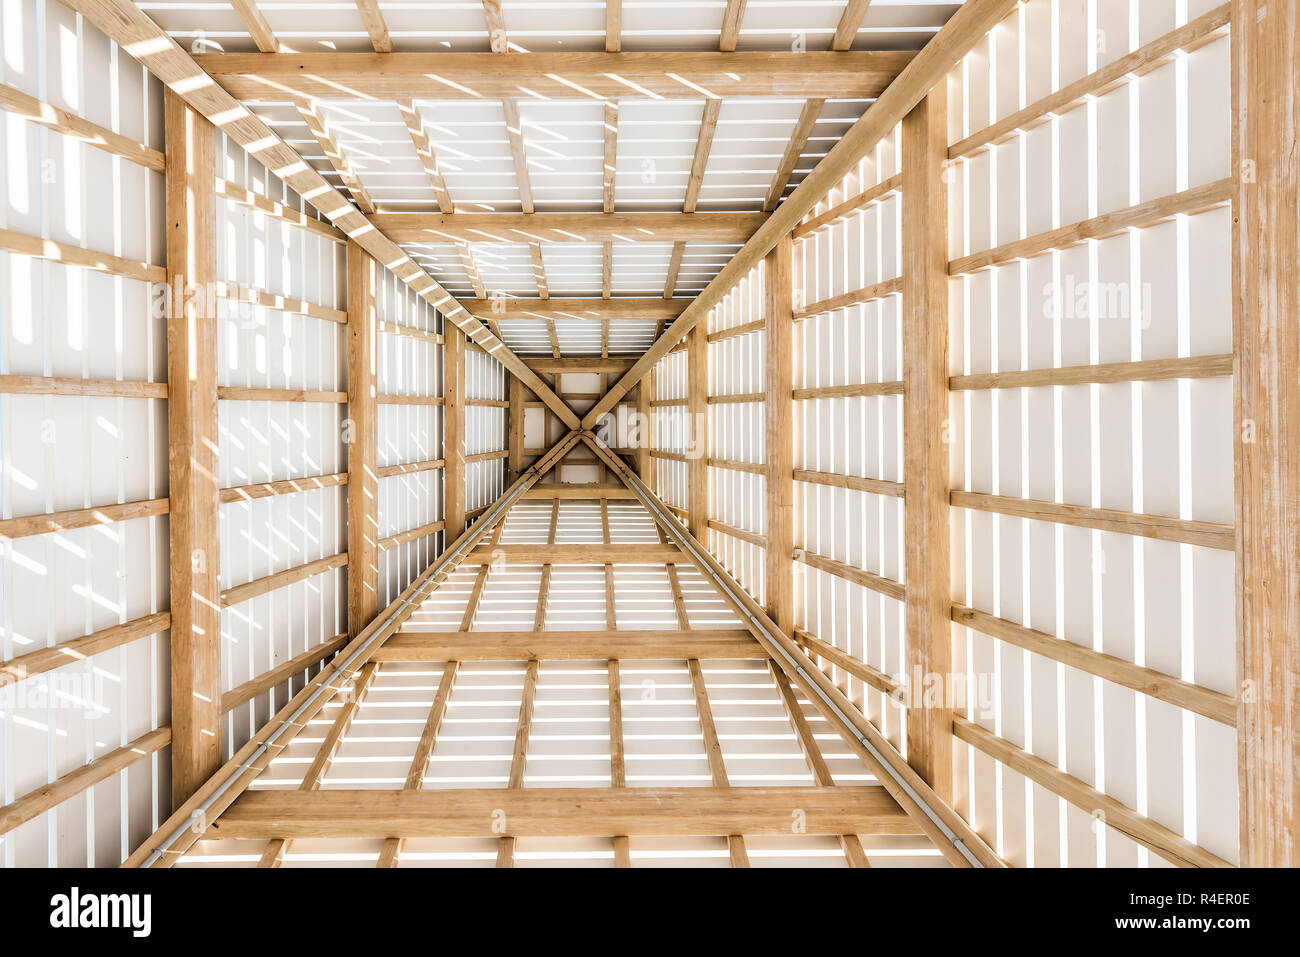 Looking up abstract low angle of wooden pavilion tower roof ceiling closeup by beach ocean gazebo in Florida, architecture, view Stock Photo